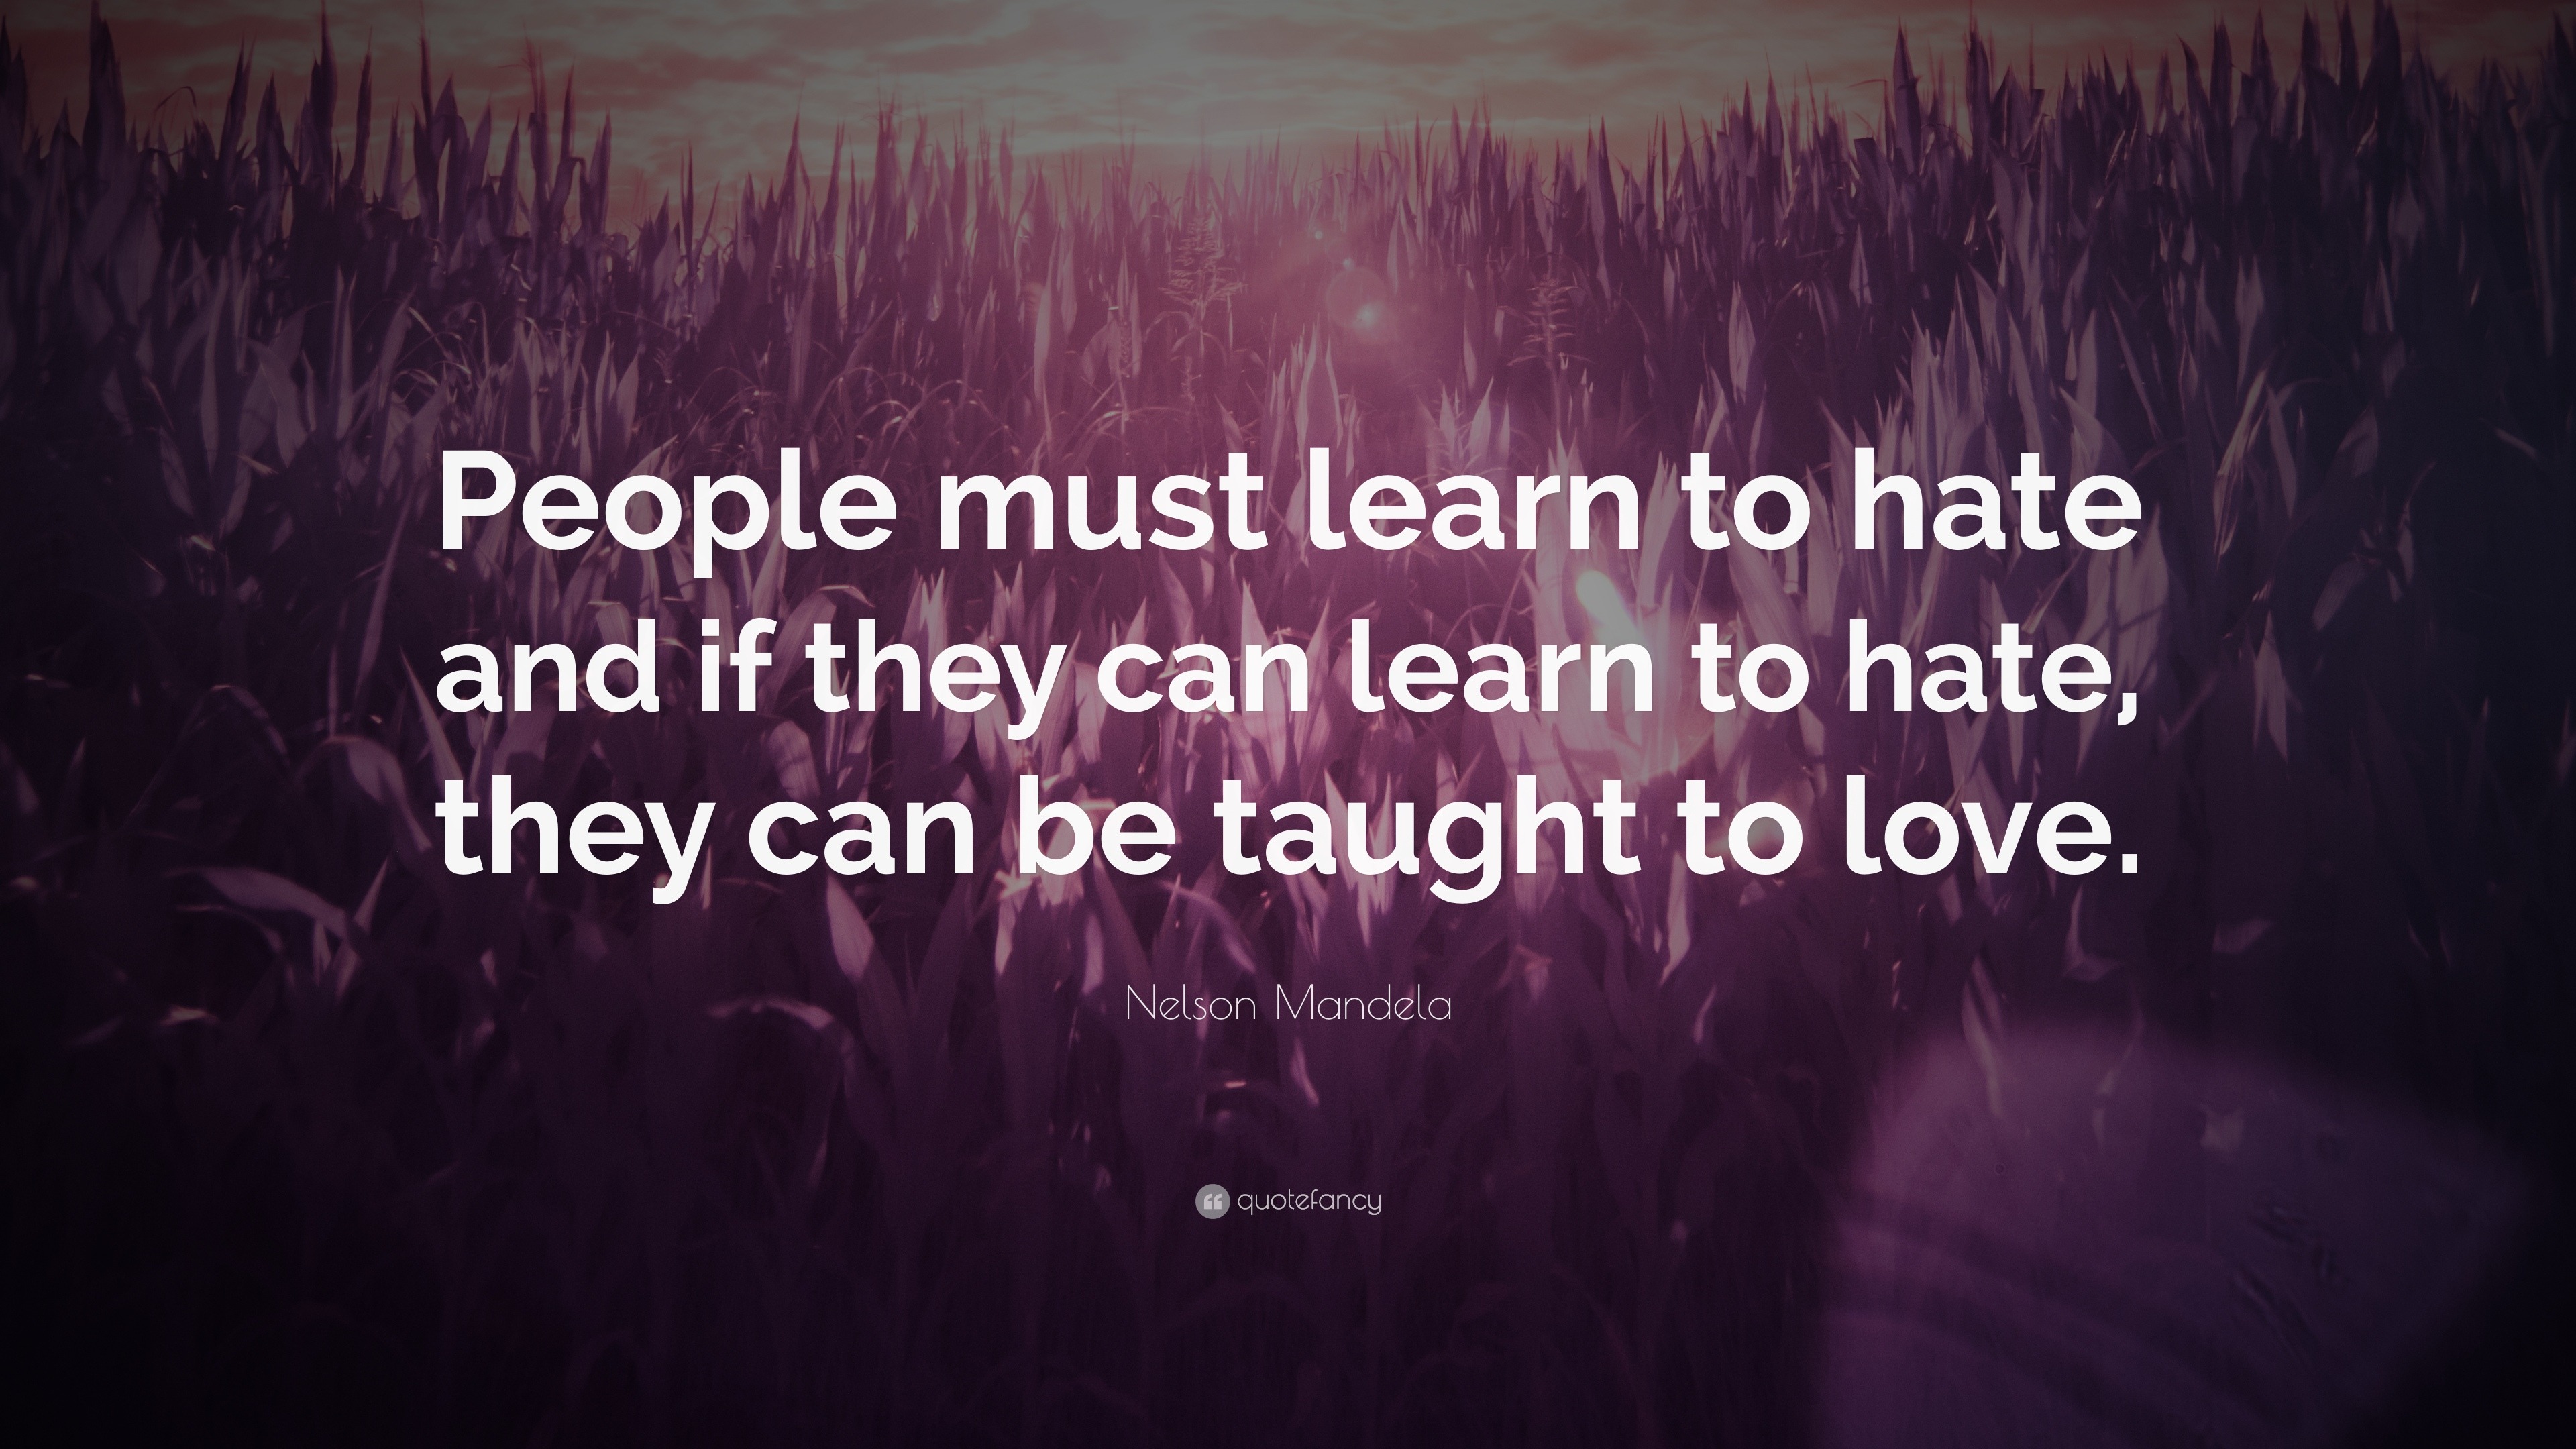 Hate Quotes “People must learn to hate and if they can learn to hate